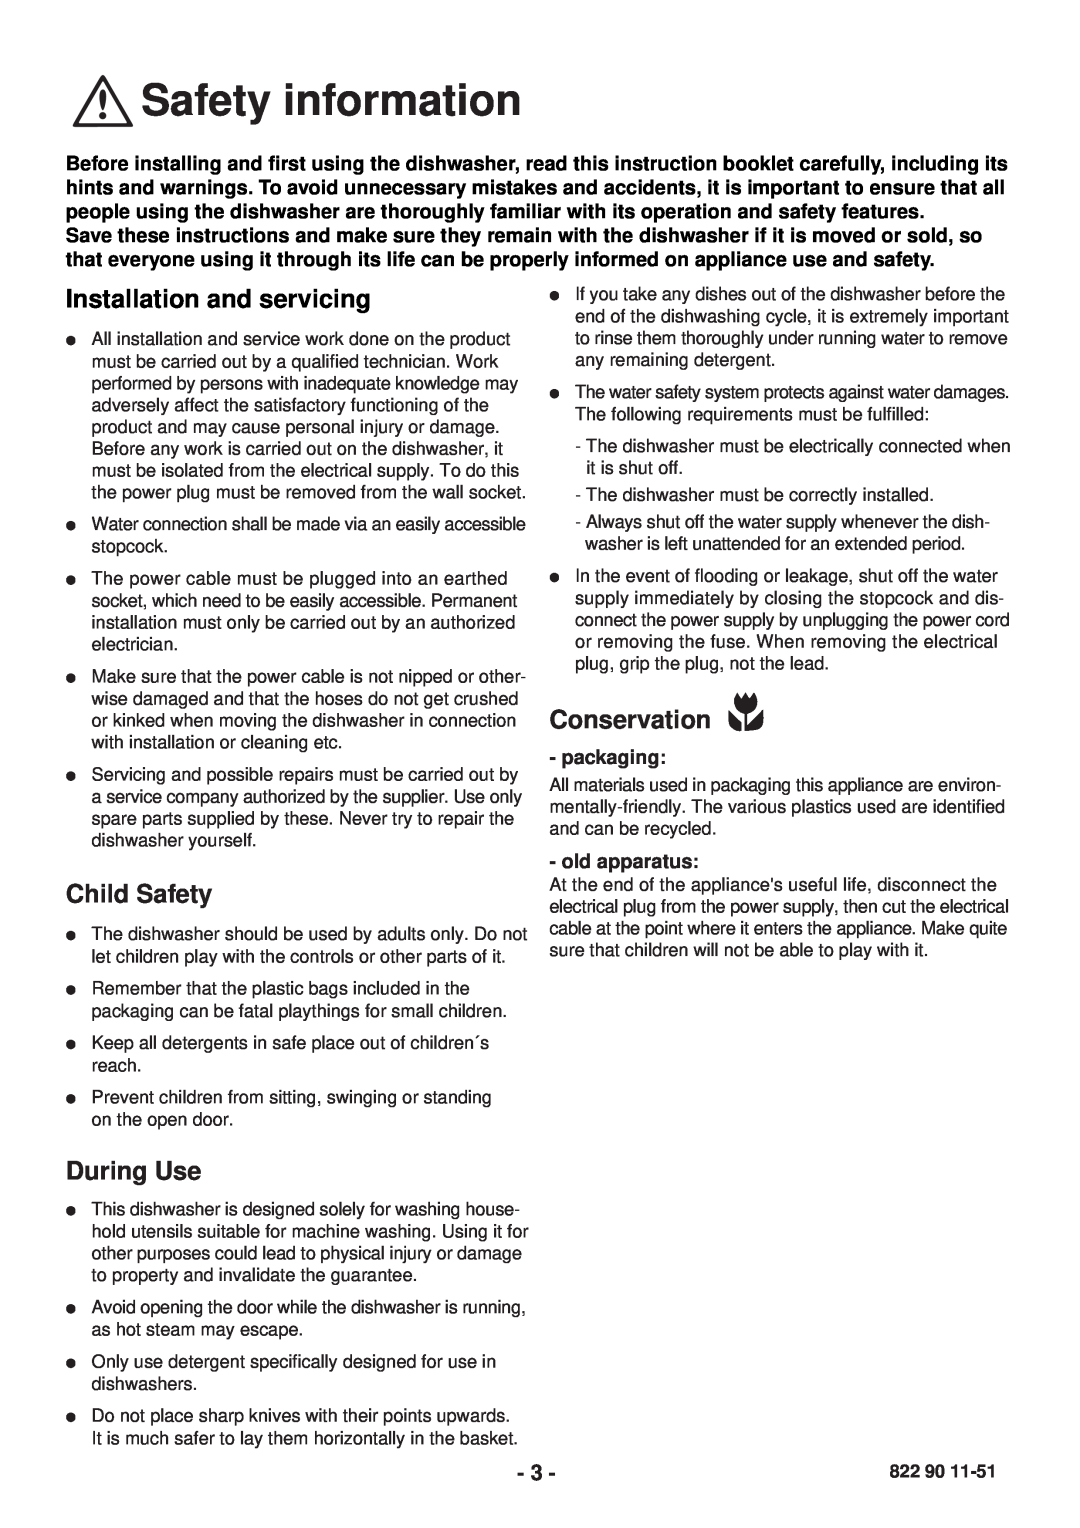 Zanussi DCE 5655 manual Safety information, Installation and servicing, Conservation, Child Safety, During Use 